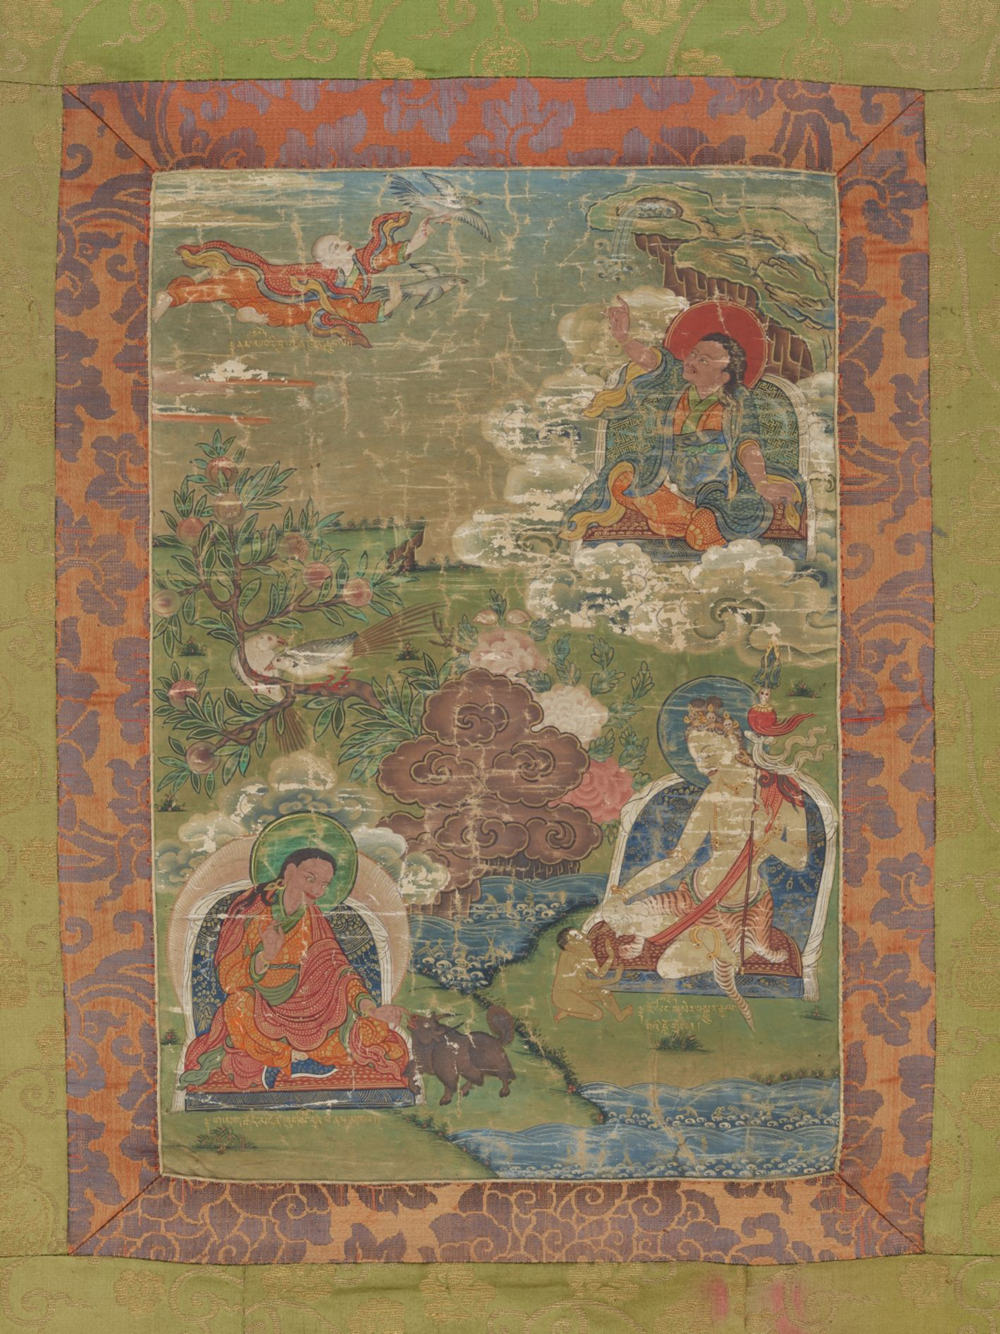 Padmasambhava with his 25 Tibetan Pupils

From a series of 7 thangkas 
